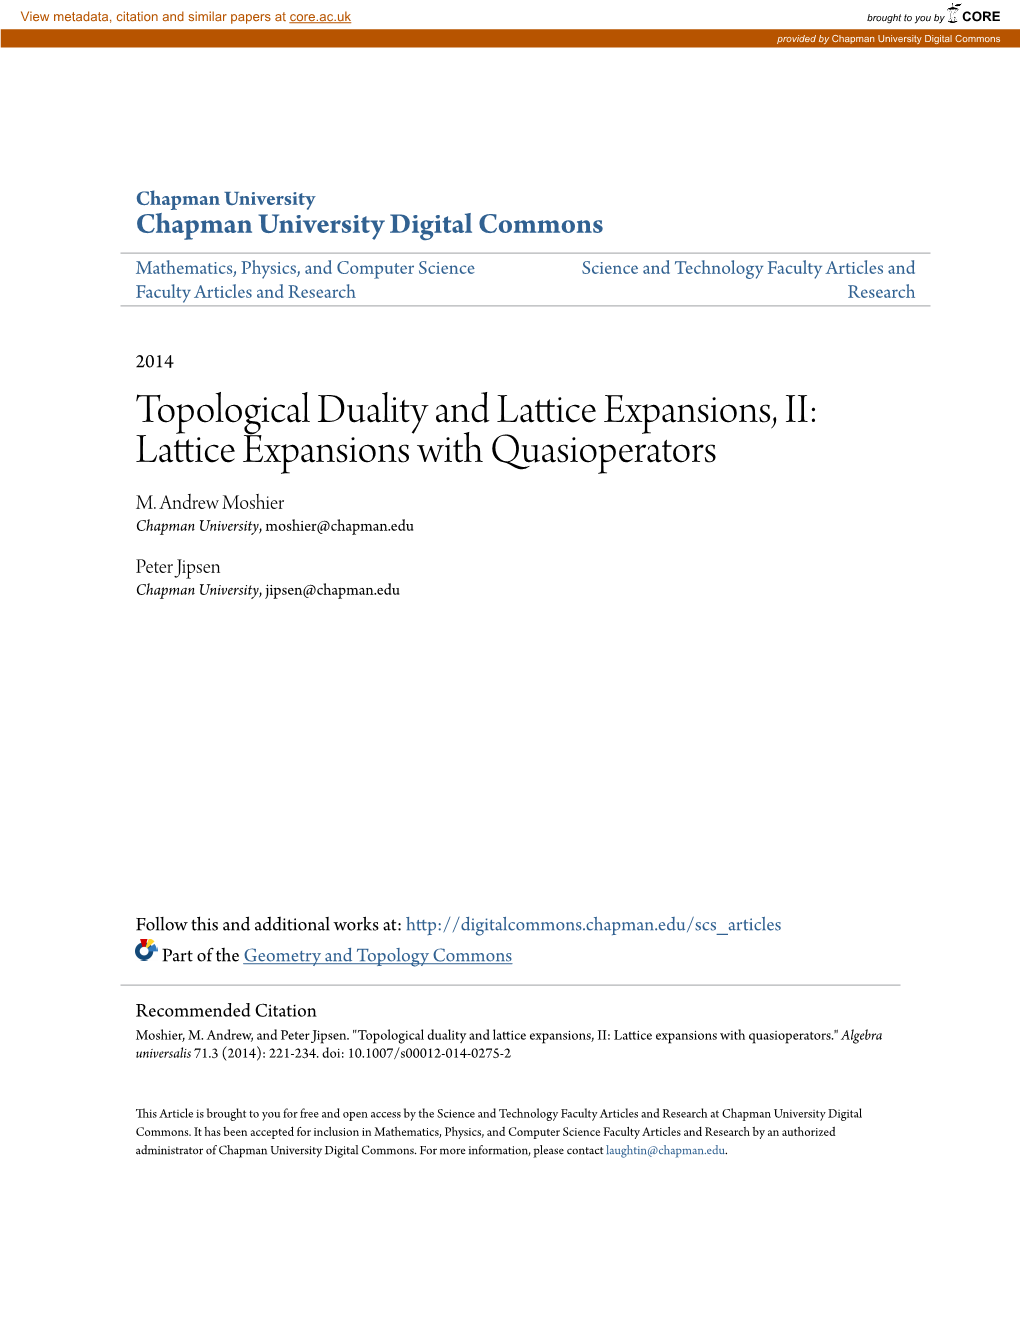 Topological Duality and Lattice Expansions, II: Lattice Expansions with Quasioperators M